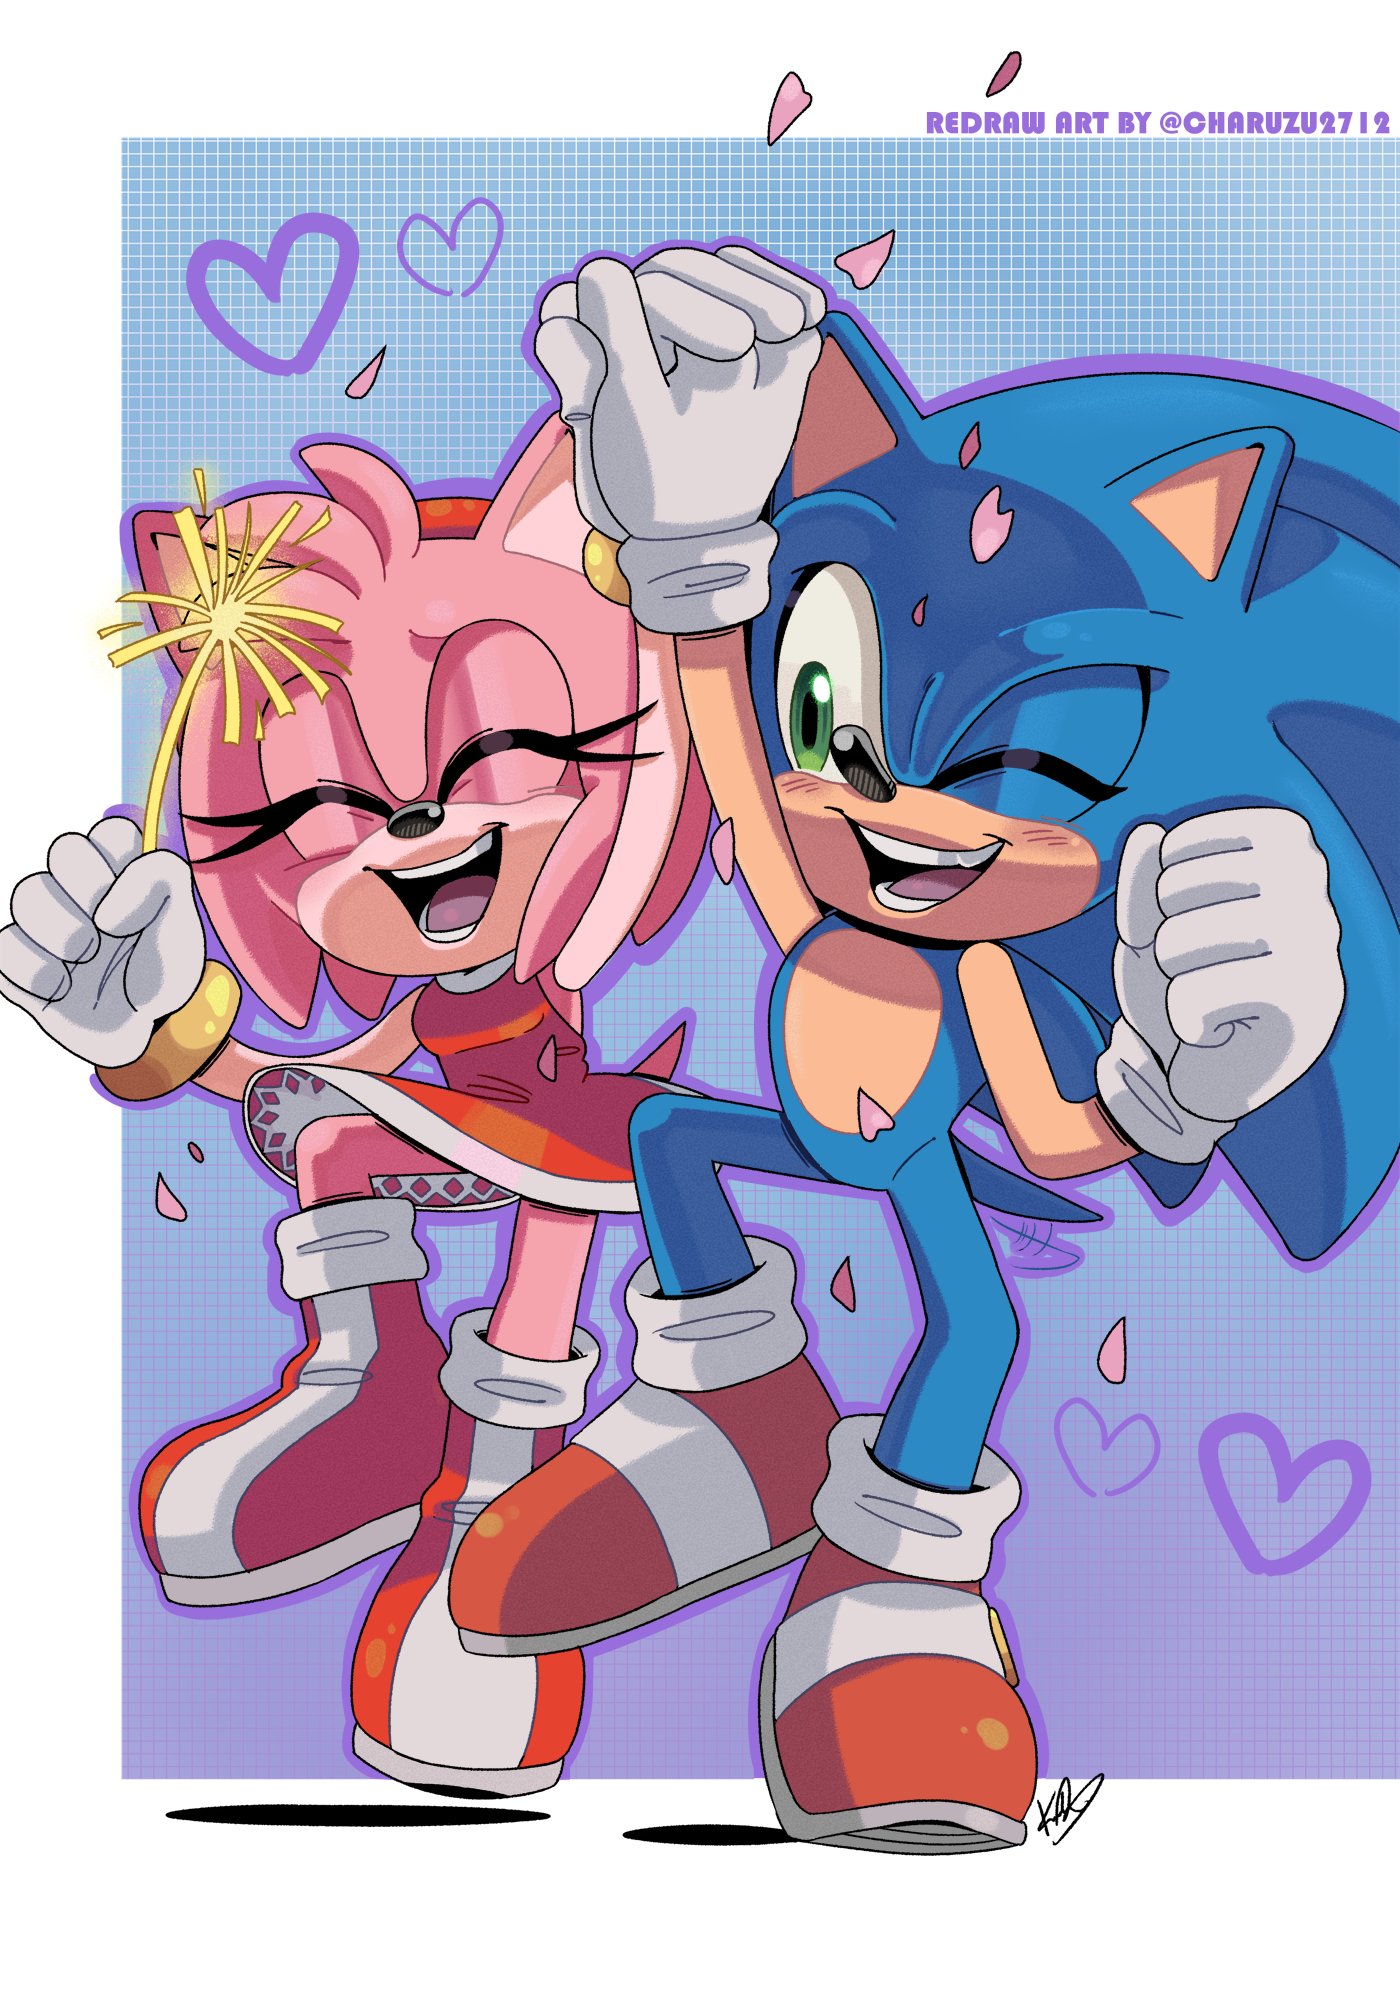 ˏˋ 𝙹𝚊𝚌𝚘☕🫀´ˎ˗🔴WORKING ON COMMISSIONS🔴 on X: Amy rose 🦔❤️ (sonic  Boom)  / X